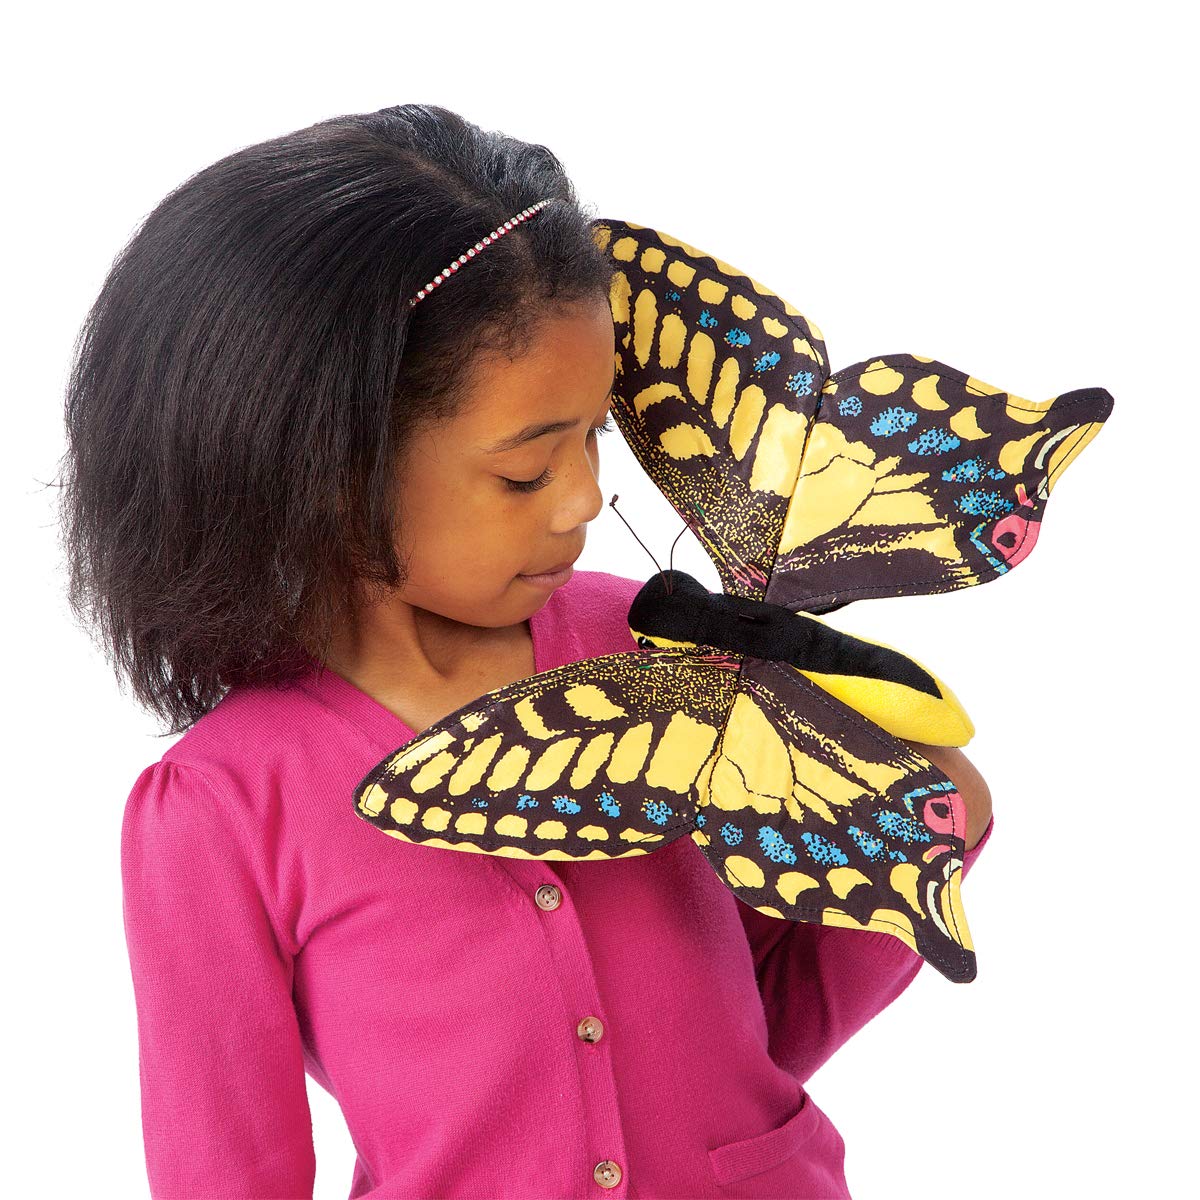 Folkmanis Swallowtail Butterfly Hand Puppet, Multi-Colored